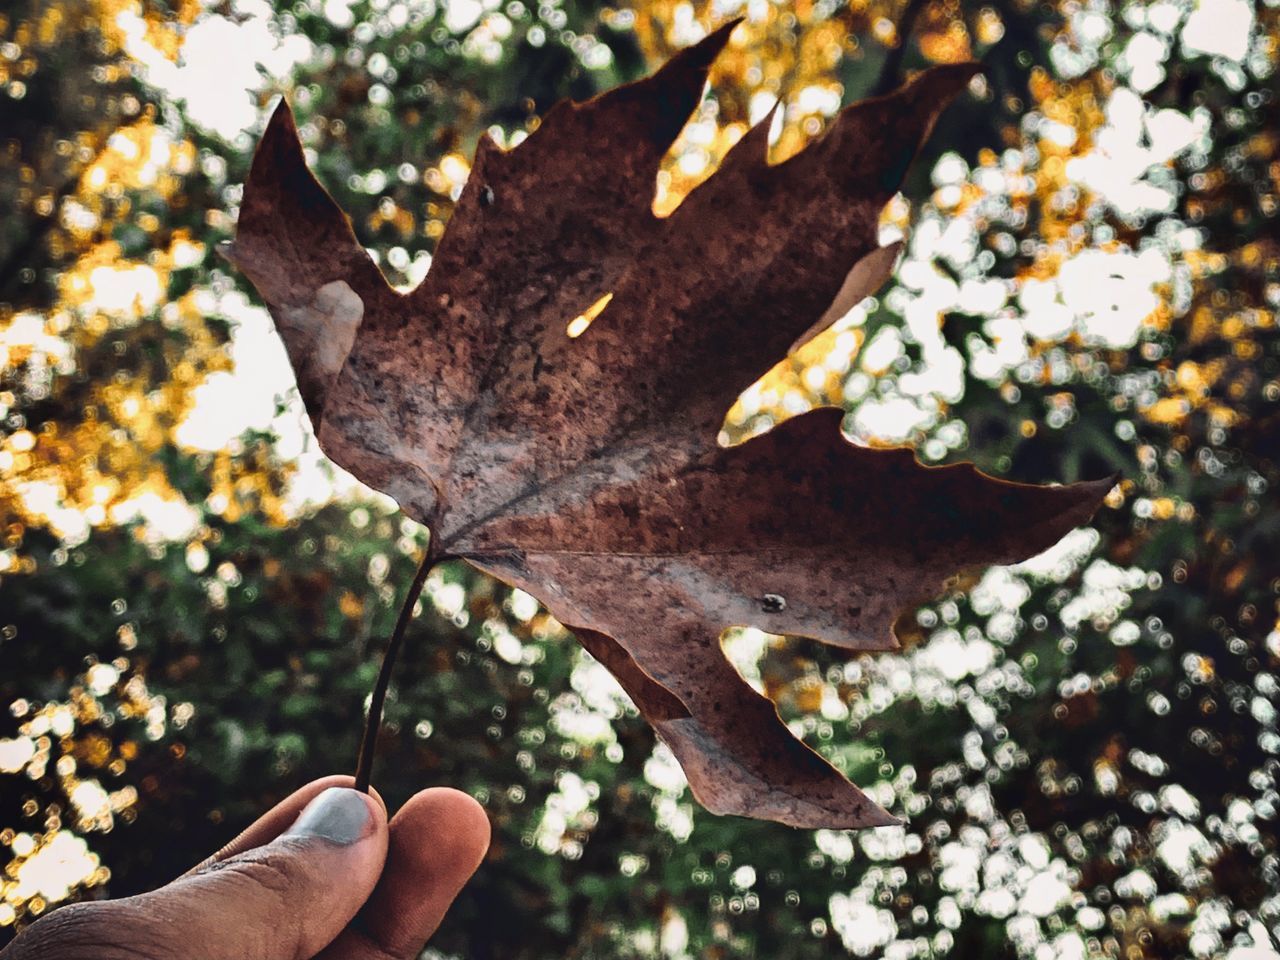 CLOSE-UP OF PERSON HAND HOLDING MAPLE LEAVES